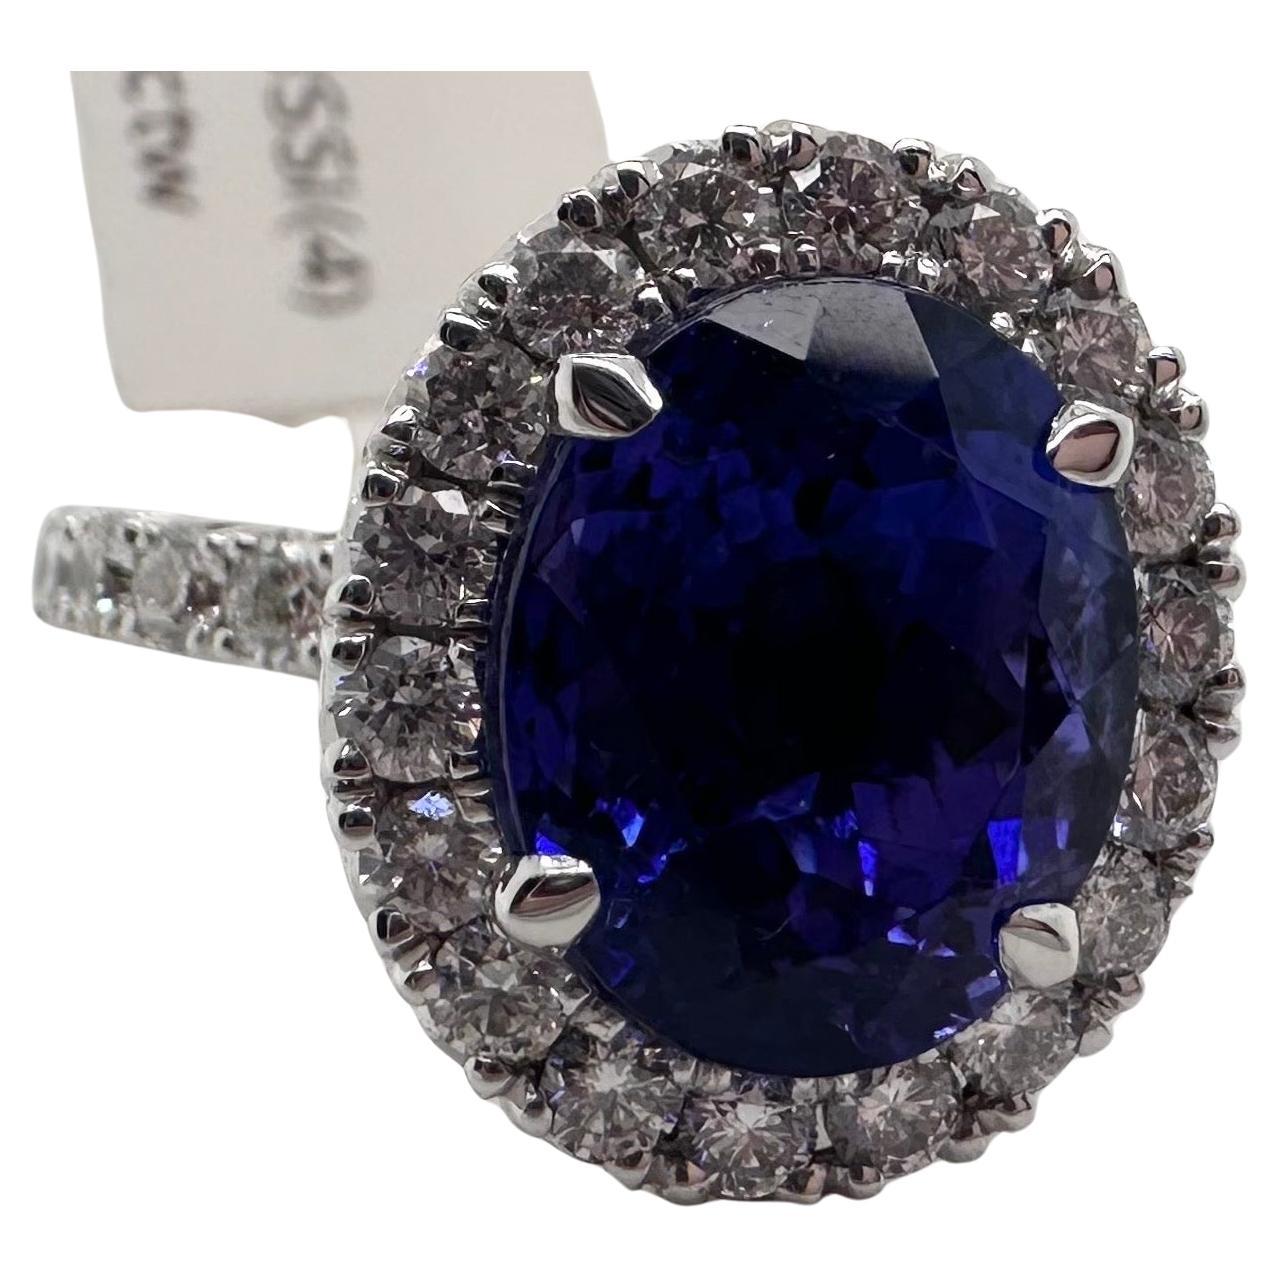 Stunning Tanzanite engagement ring in 14KT white gold, deep violet tanzanite is hard to find with the right amount of saturation. This ring glows like no other! Made by hand with meticoulous details throughout!
Metal Type: 14KT
Natural